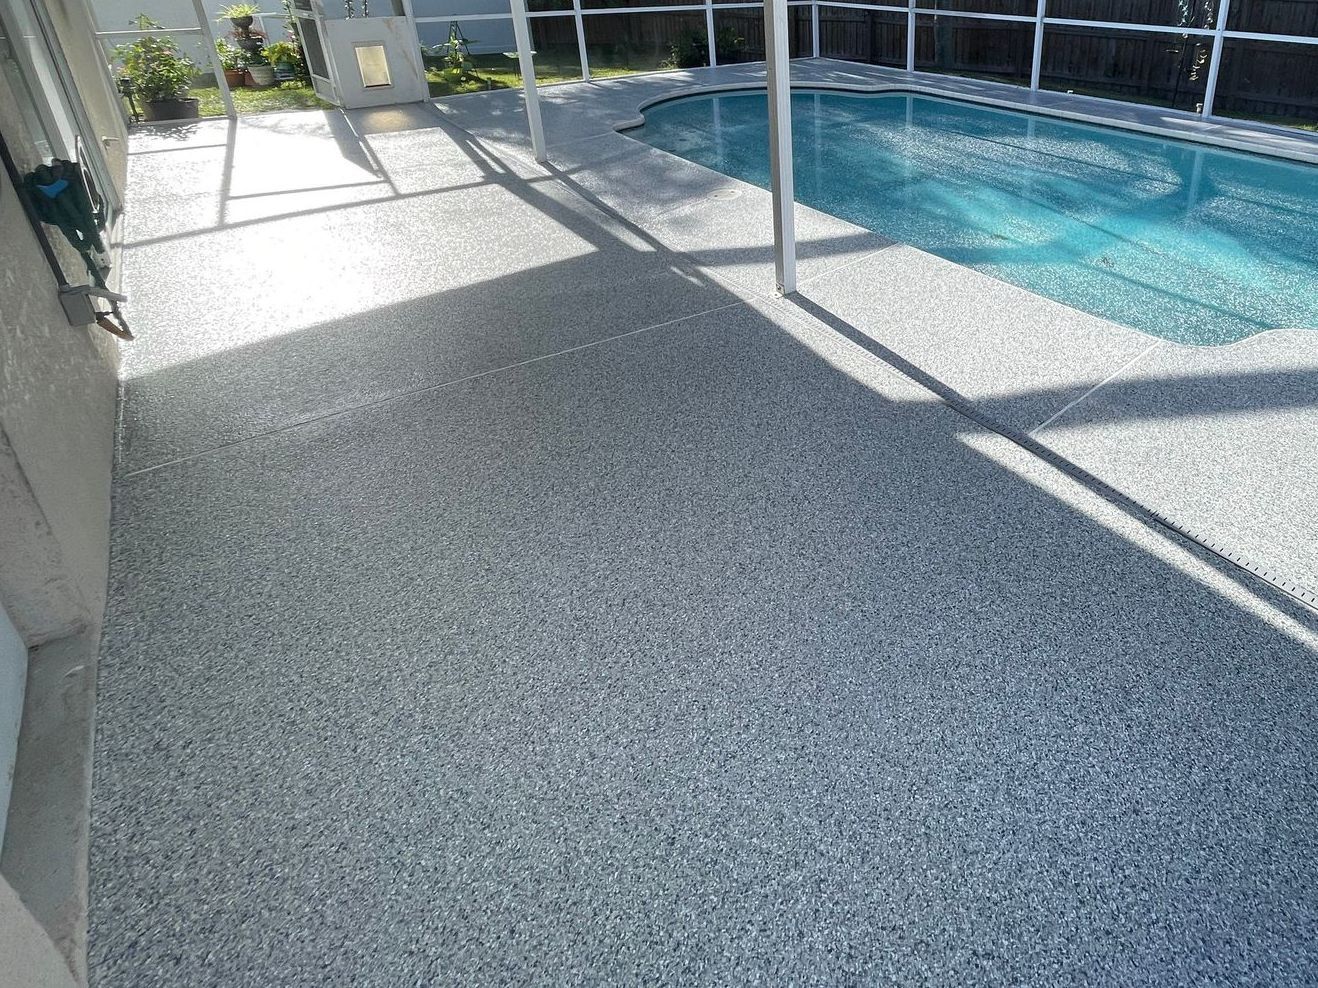 Beautiful cool-toned pool deck after cracks were mended and new concrete coating applied